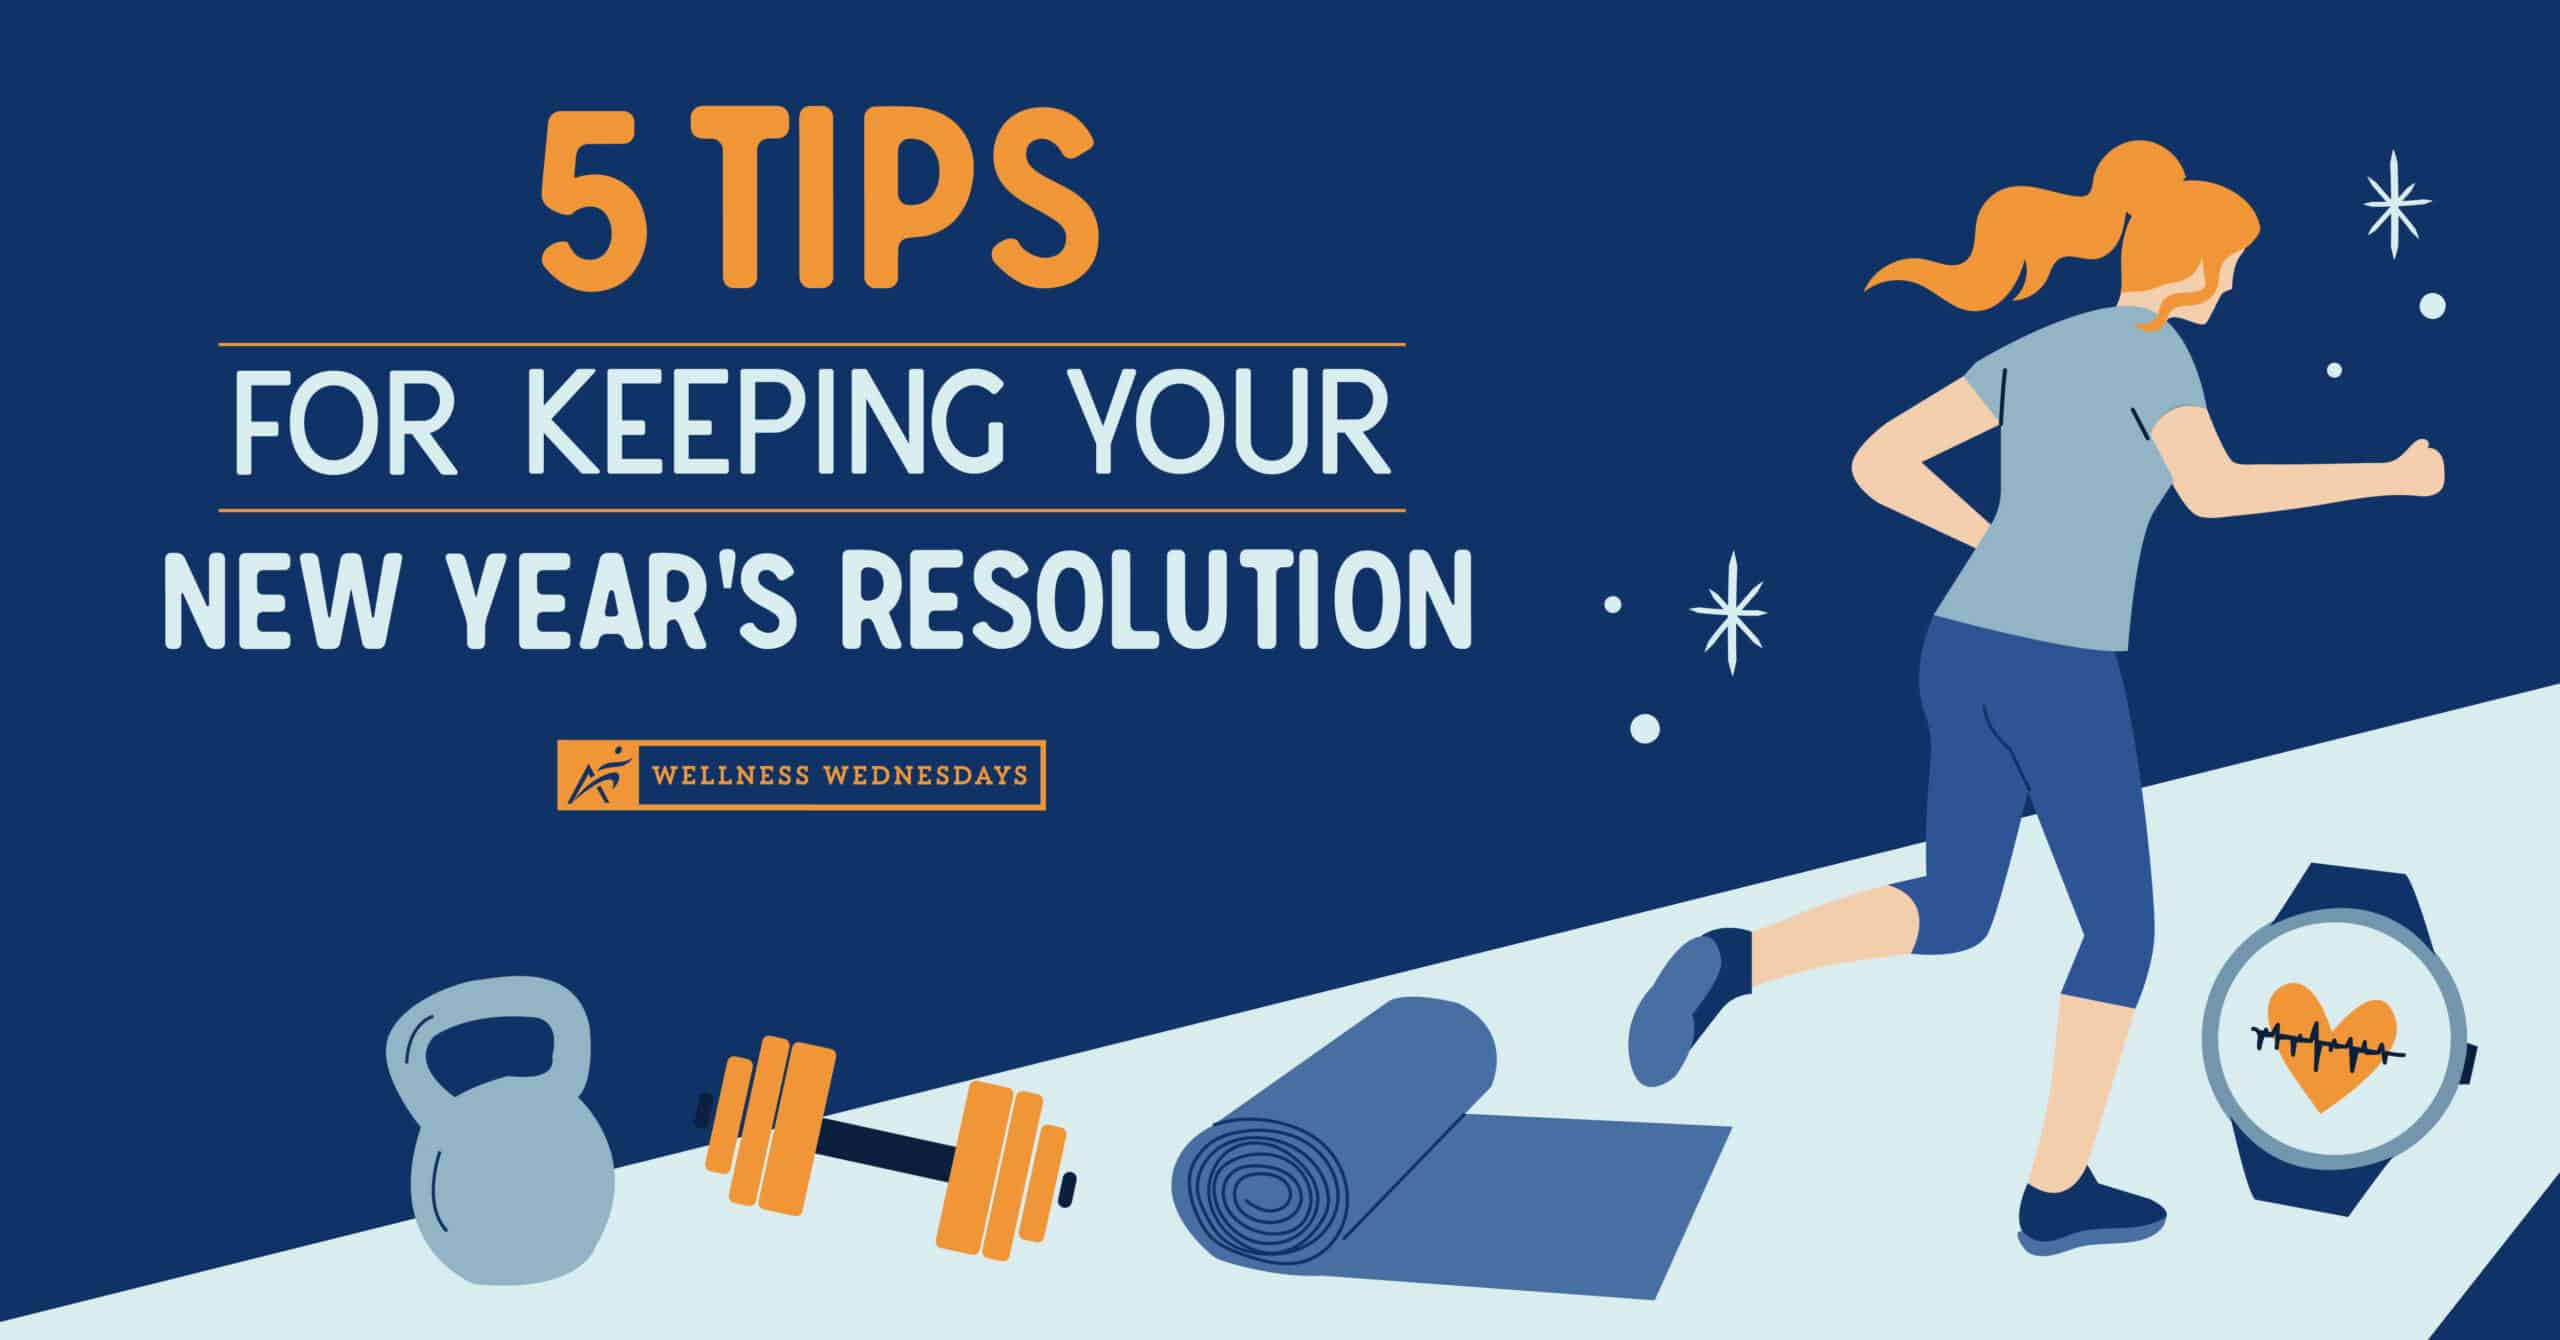 5 Tips for Keeping Your New Year's Resolution